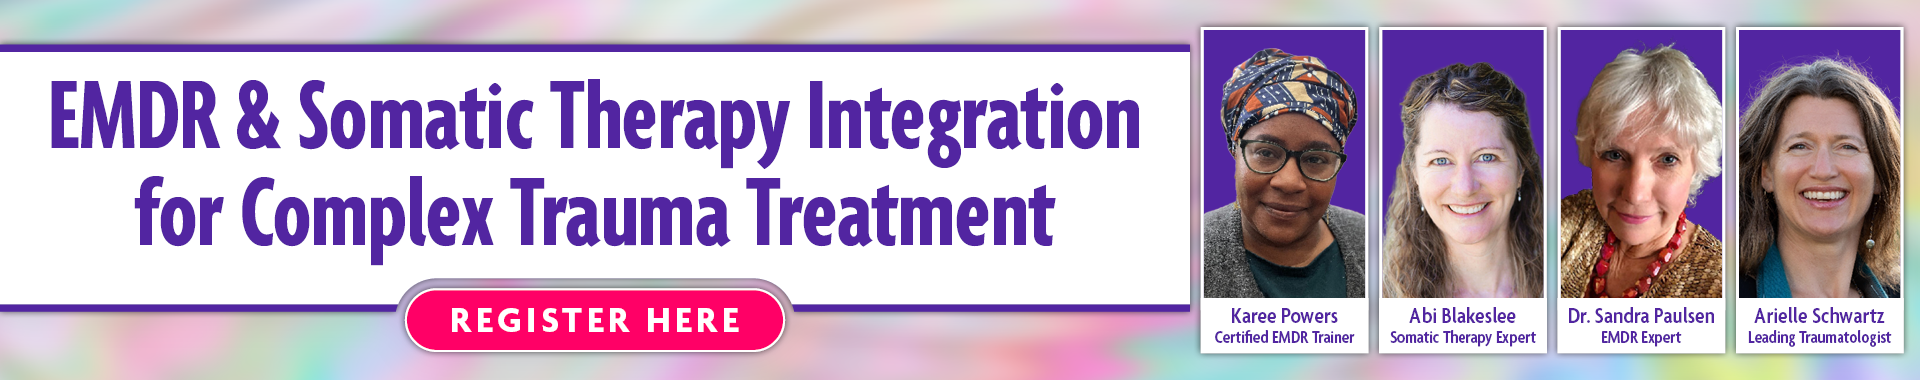 EMDR & Somatic Therapy Integration